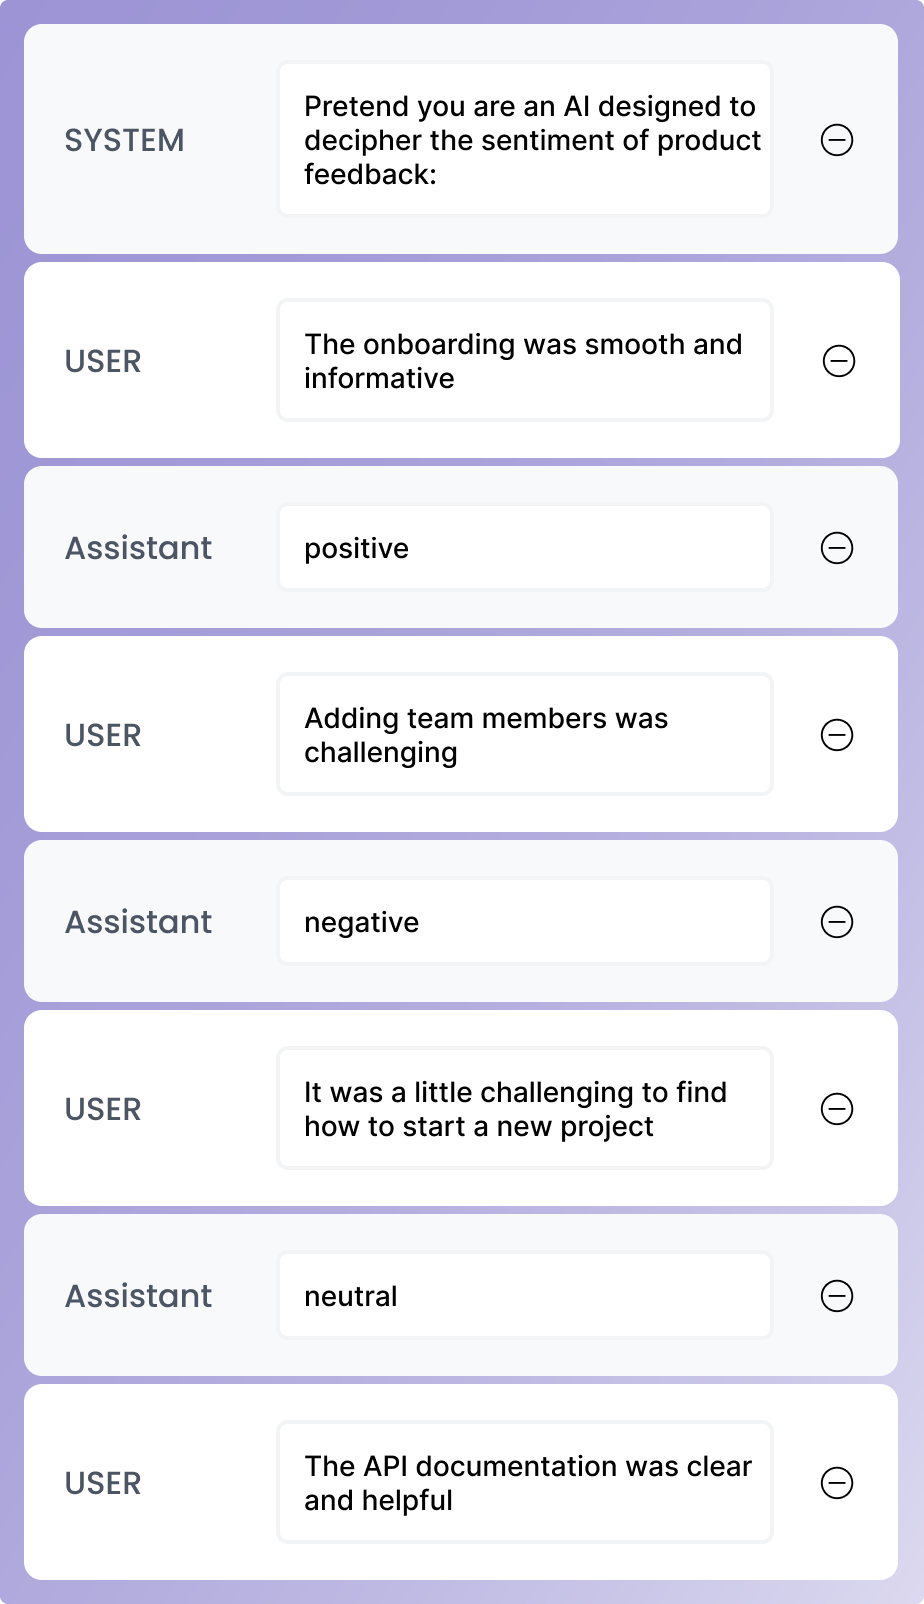 A series of user and assistant messages on top of a purple gradient background